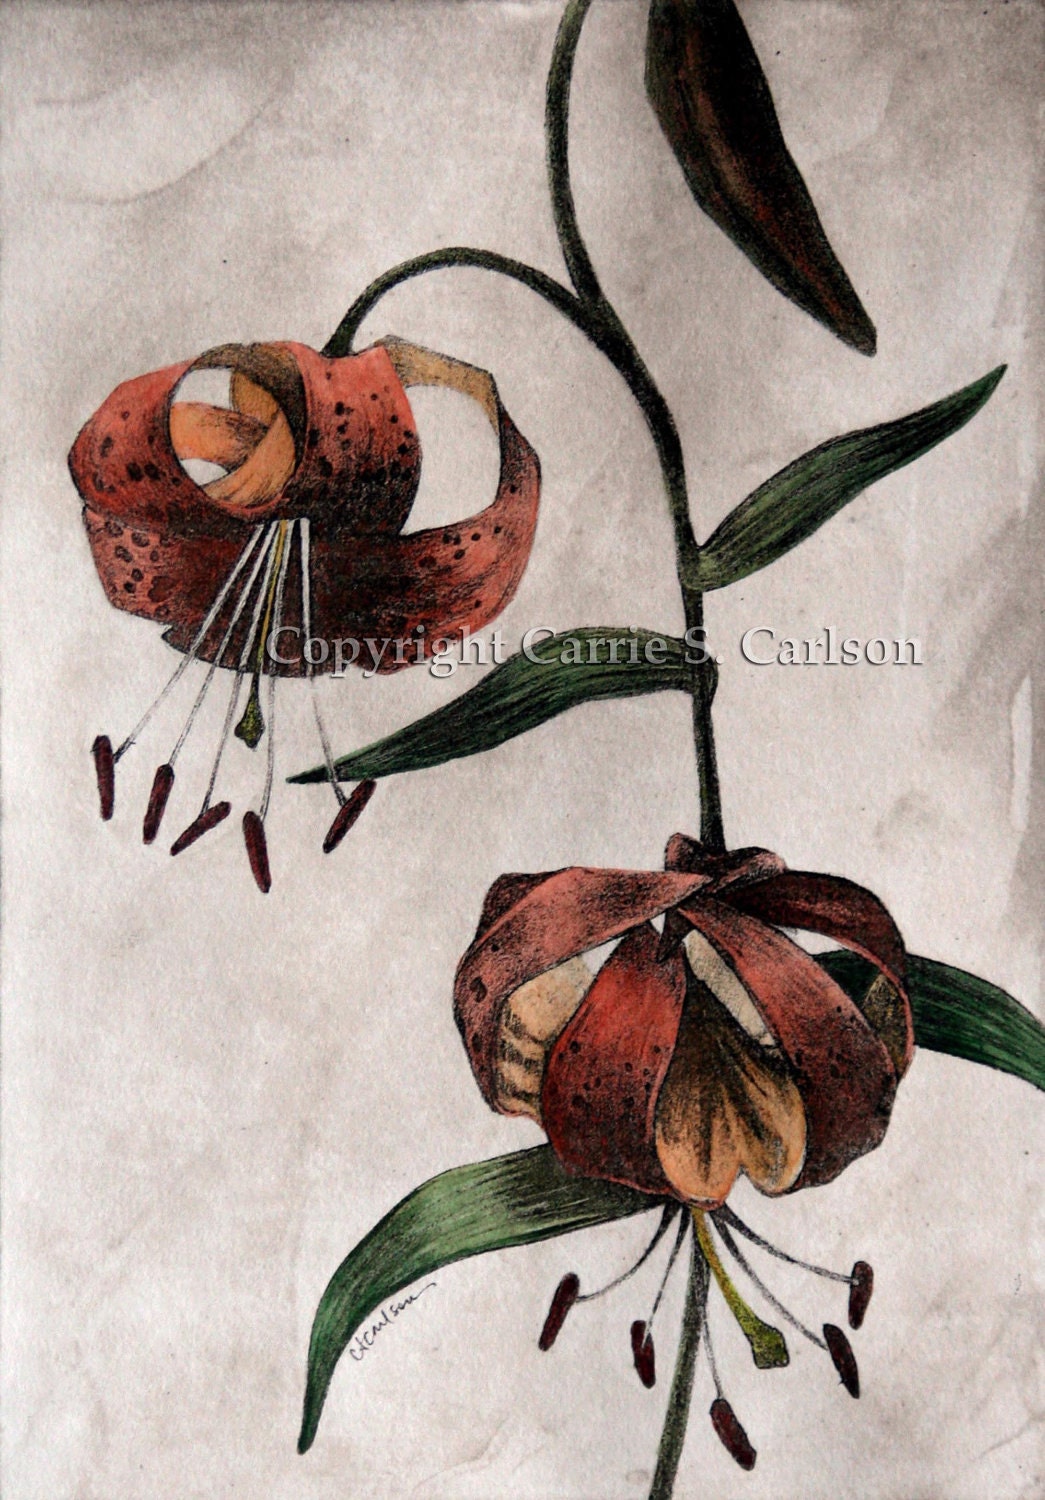 Tiger Lilies - print of original hand-colored solarplate etching 8x10 - CarrieCarlson